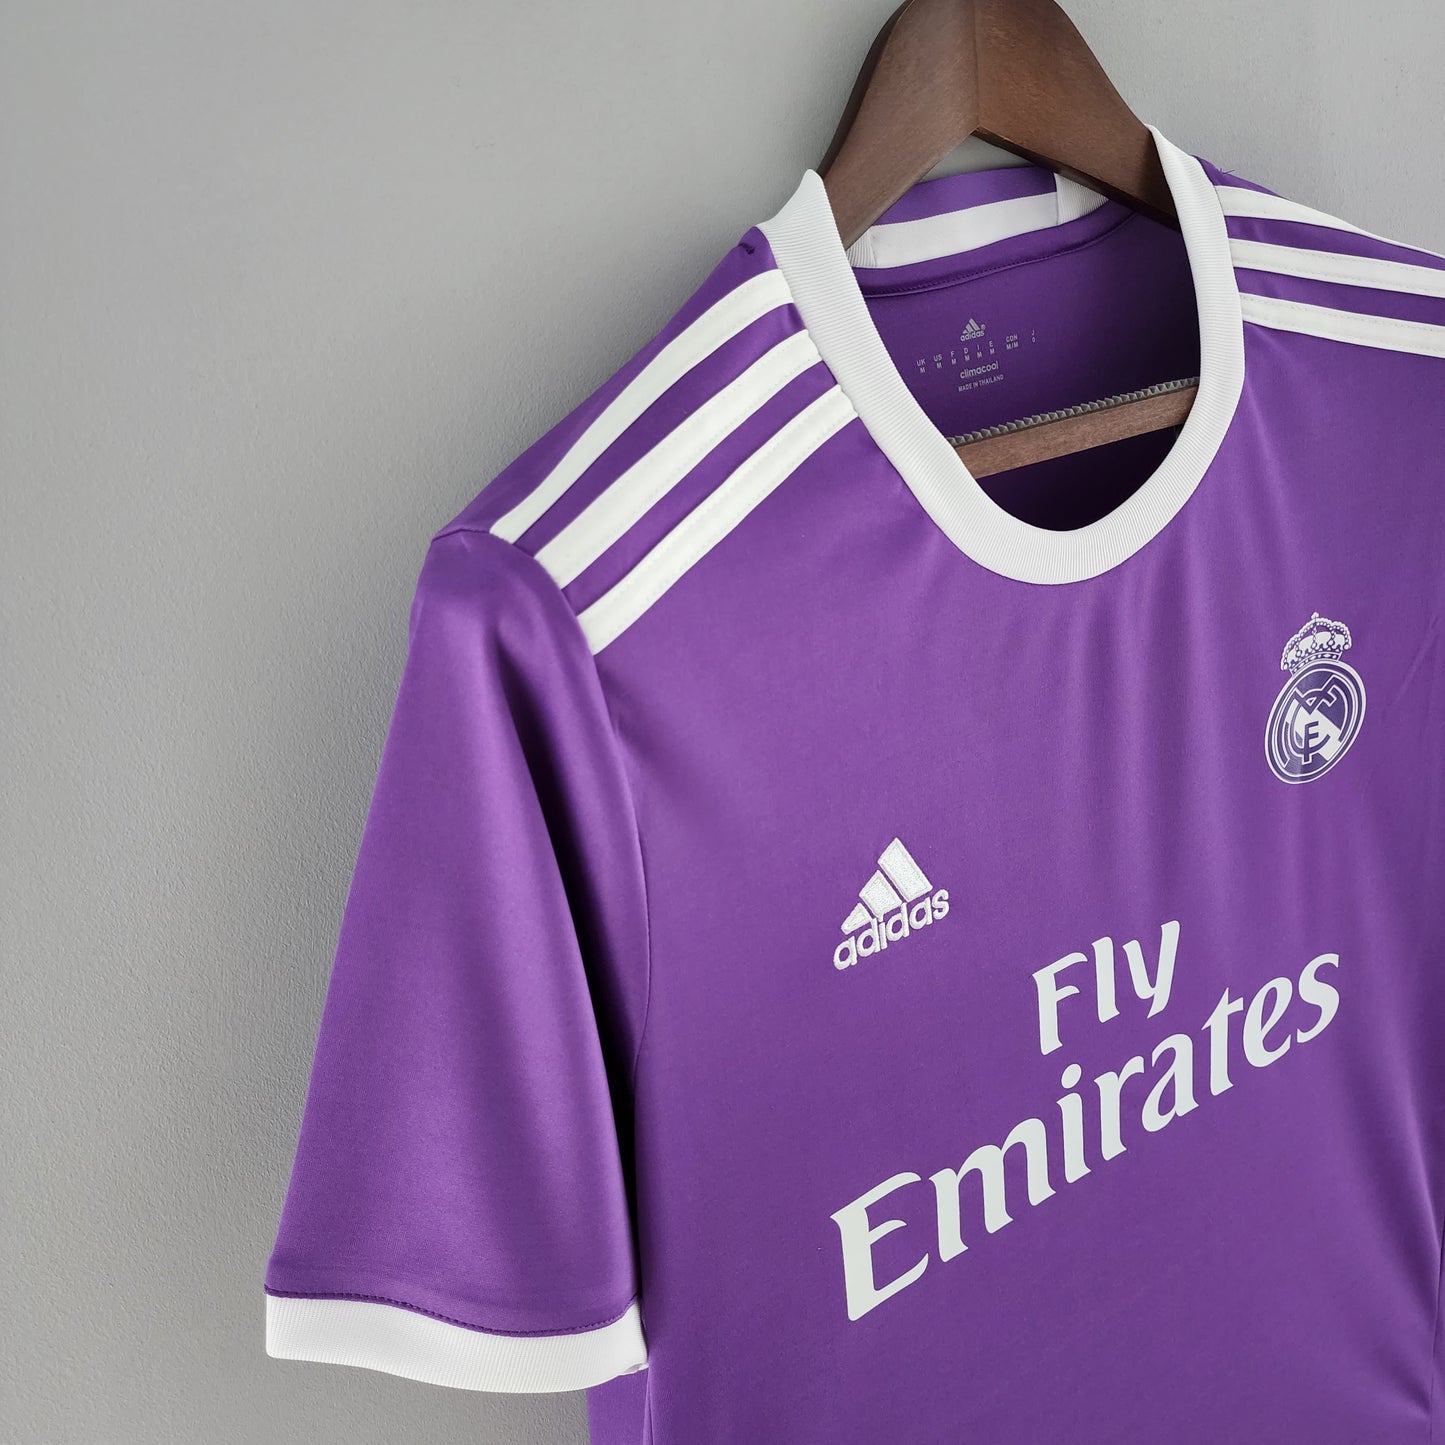 Real Madrid 2017/18 Away Jersey